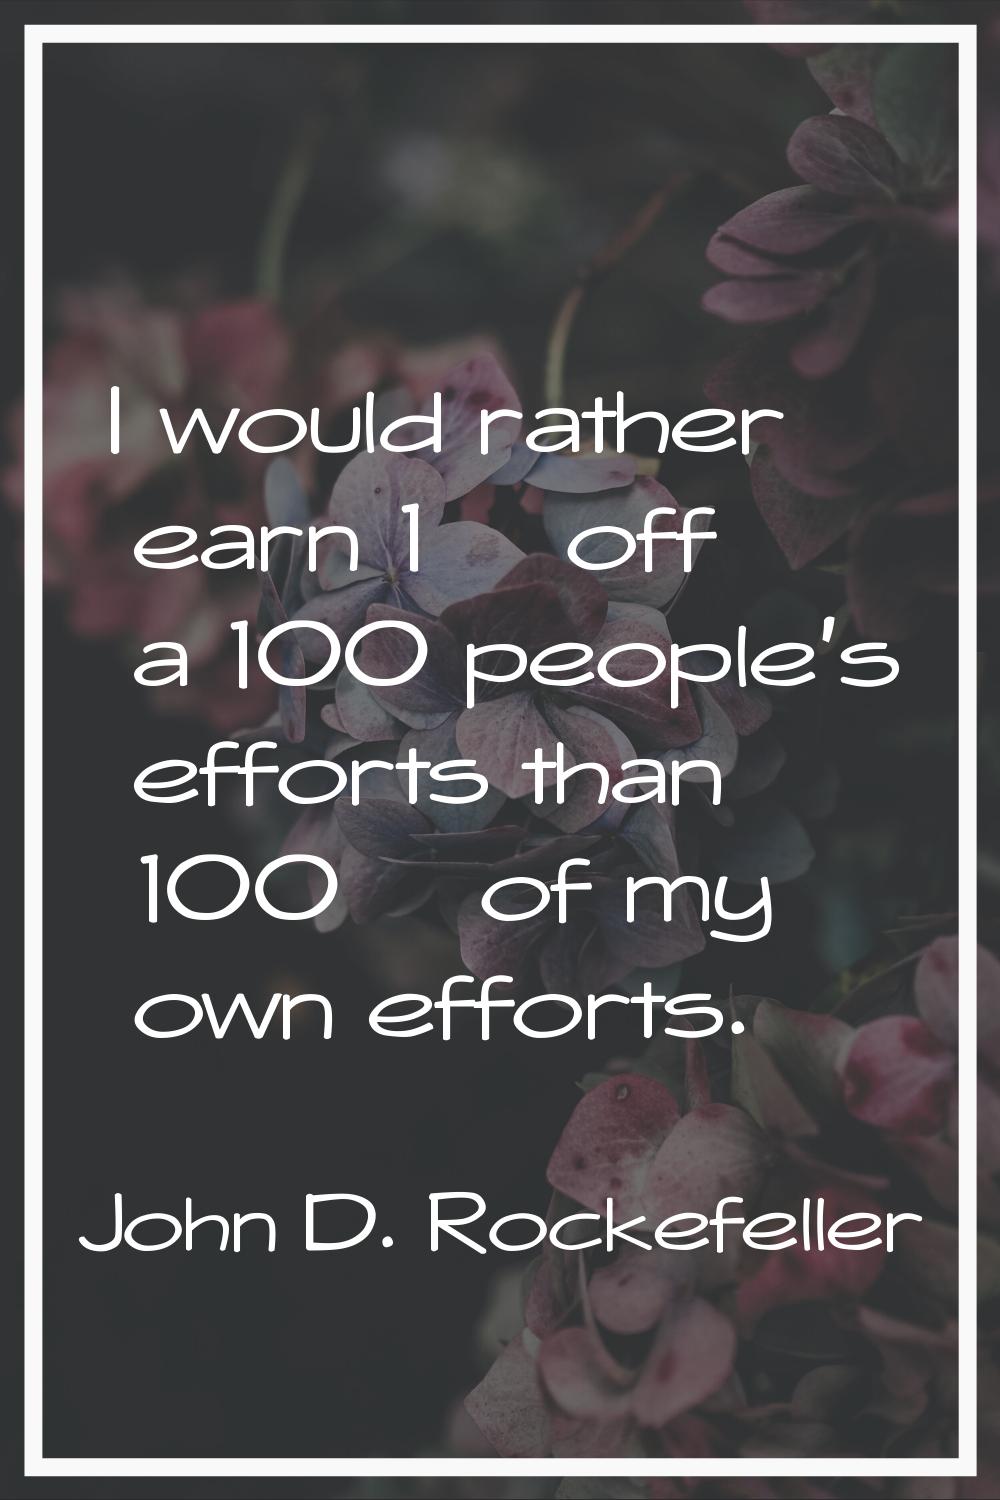 I would rather earn 1% off a 100 people's efforts than 100% of my own efforts.